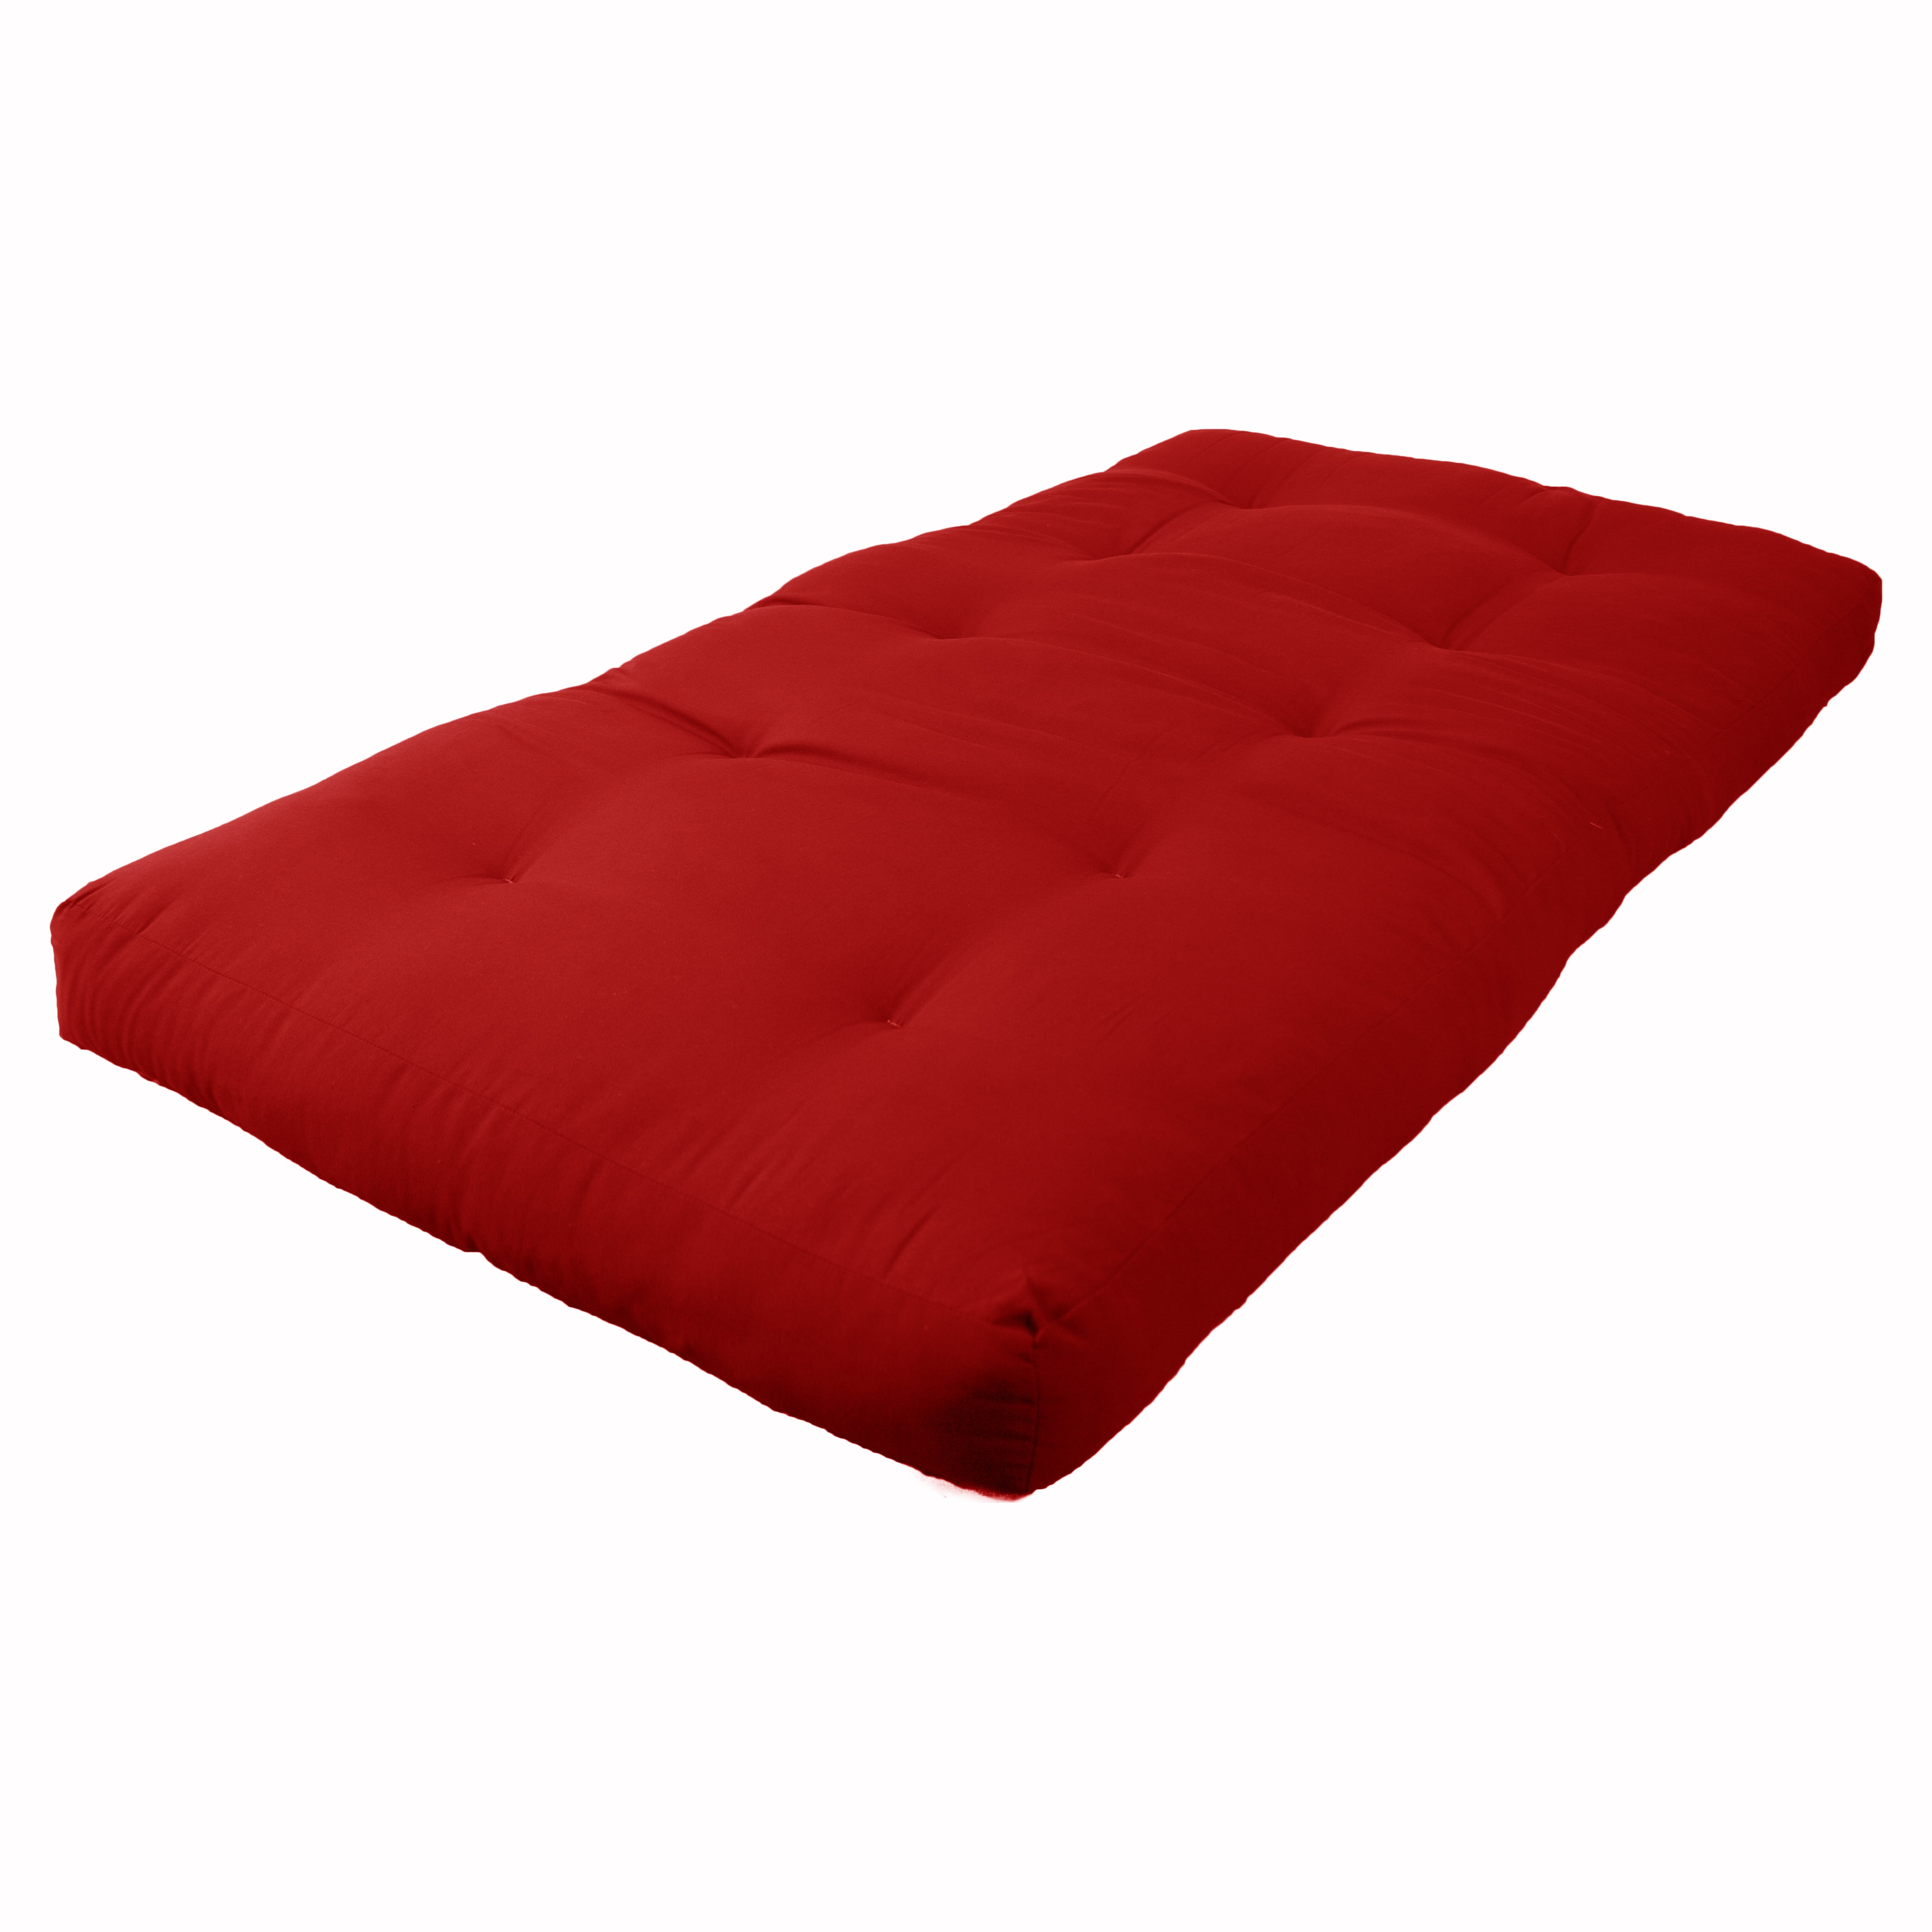 Picture of Blazing Needles 9601-TW-RR 6 in. Renewal Twill Twin Size Futon Mattress, Ruby Red